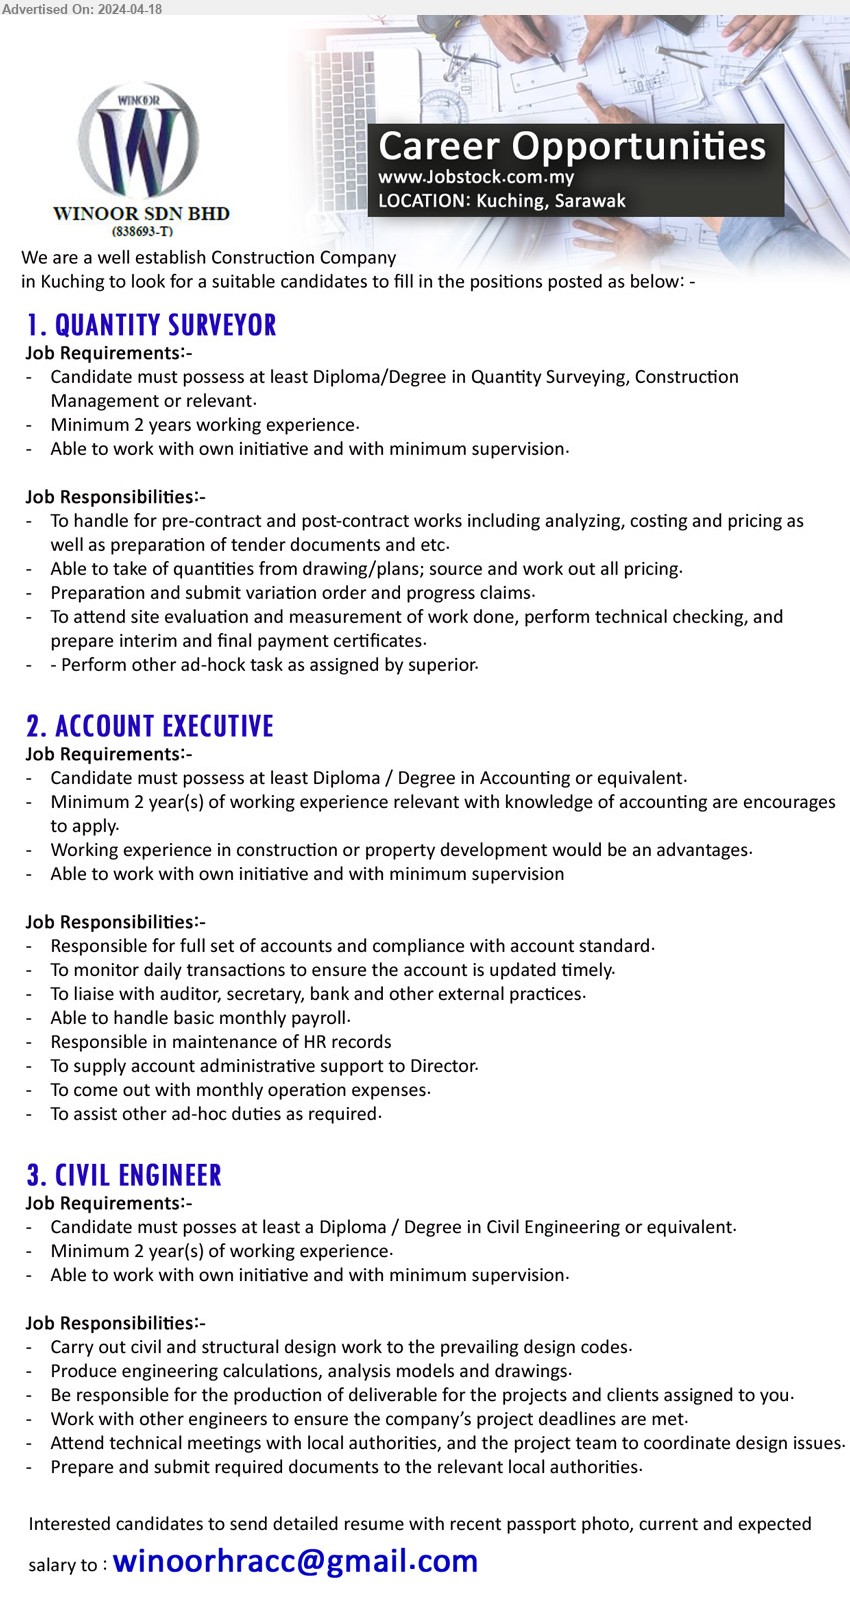 WINOOR SDN BHD - 1. QUANTITY SURVEYOR (Kuching), Diploma/Degree in Quantity Surveying, Construction Management or relevant, min. 2 years working experience.,...
2. ACCOUNT EXECUTIVE (Kuching),  Diploma / Degree in Accounting or equivalent, min. 2 year(s) of working experience relevant with knowledge of accounting,...
3. CIVIL ENGINEER (Kuching), Diploma / Degree in Civil Engineering or equivalent, min. 2 year(s) of working experience,...
Email resume to...